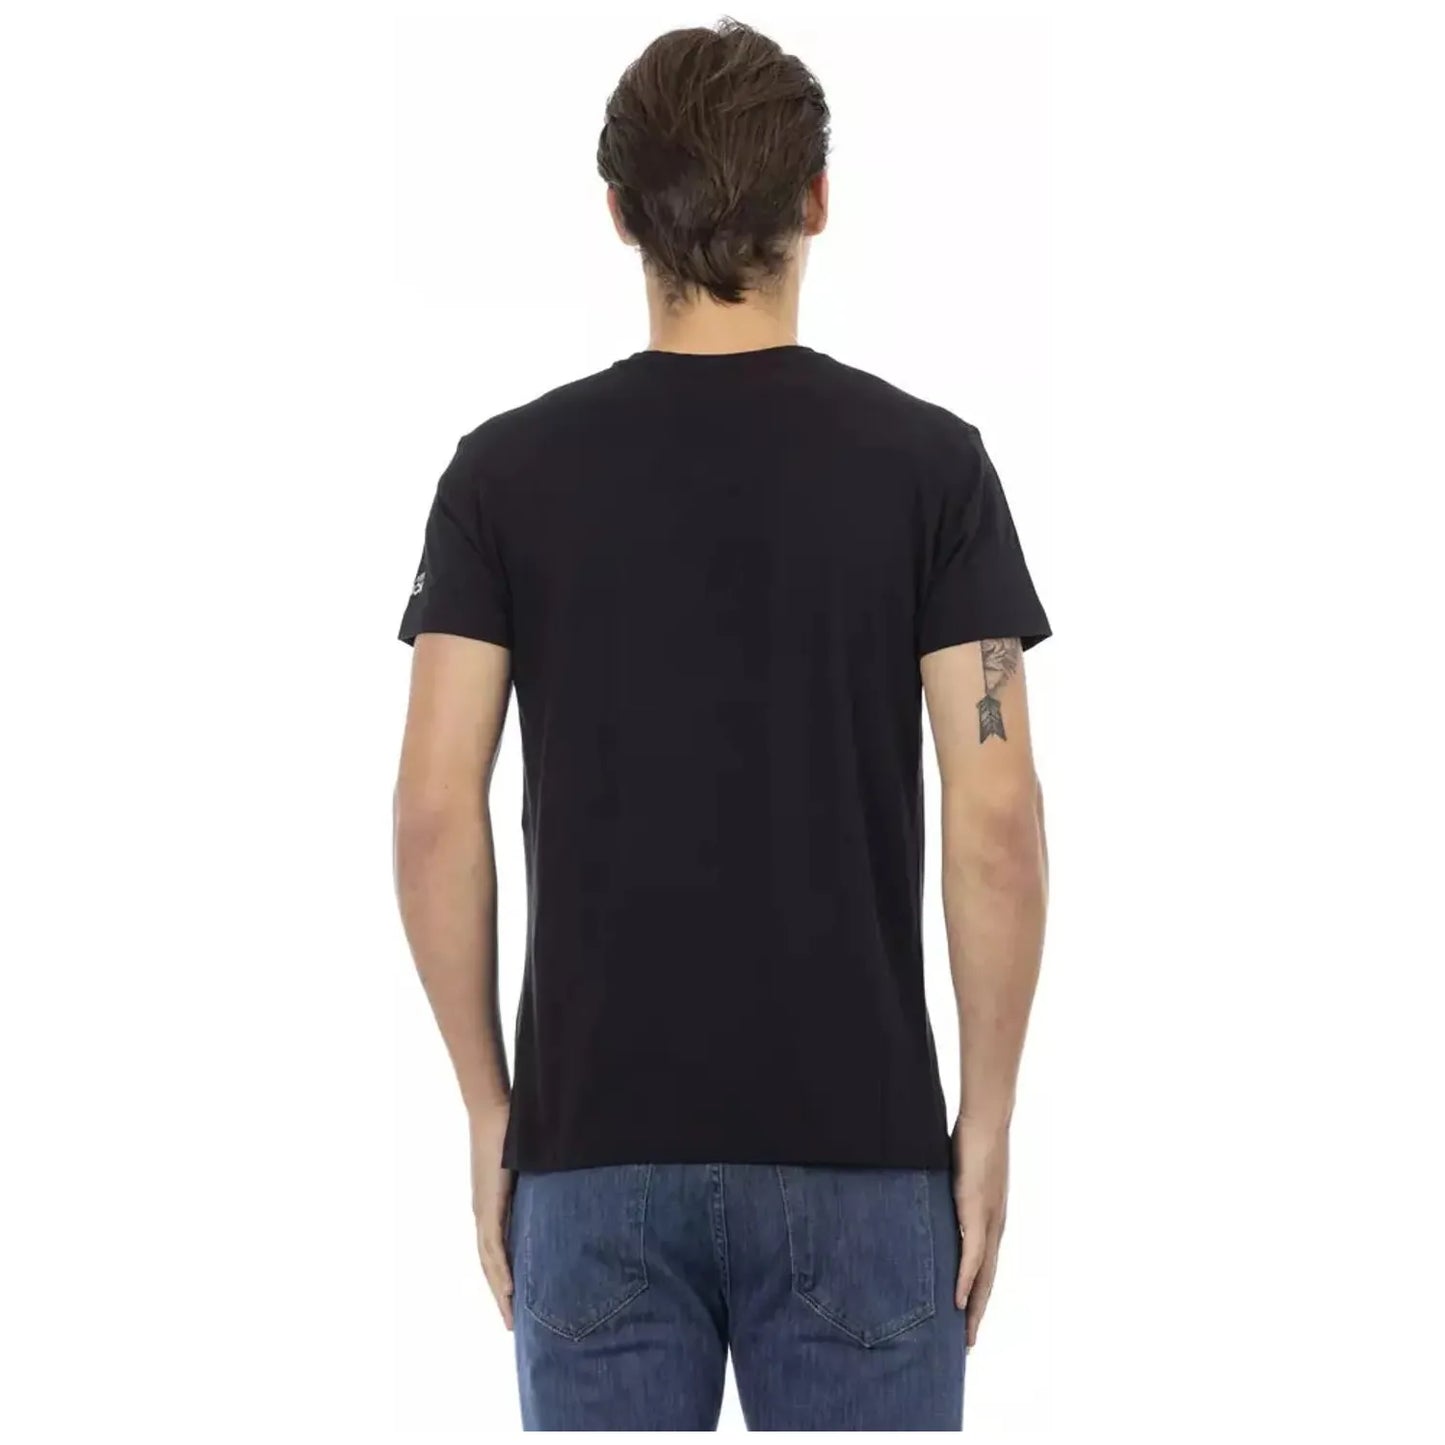 Trussardi Action Elegant V-Neck Tee with Chic Front Print black-cotton-t-shirt-22 product-22889-123460397-20-1dbe36c5-44a.webp